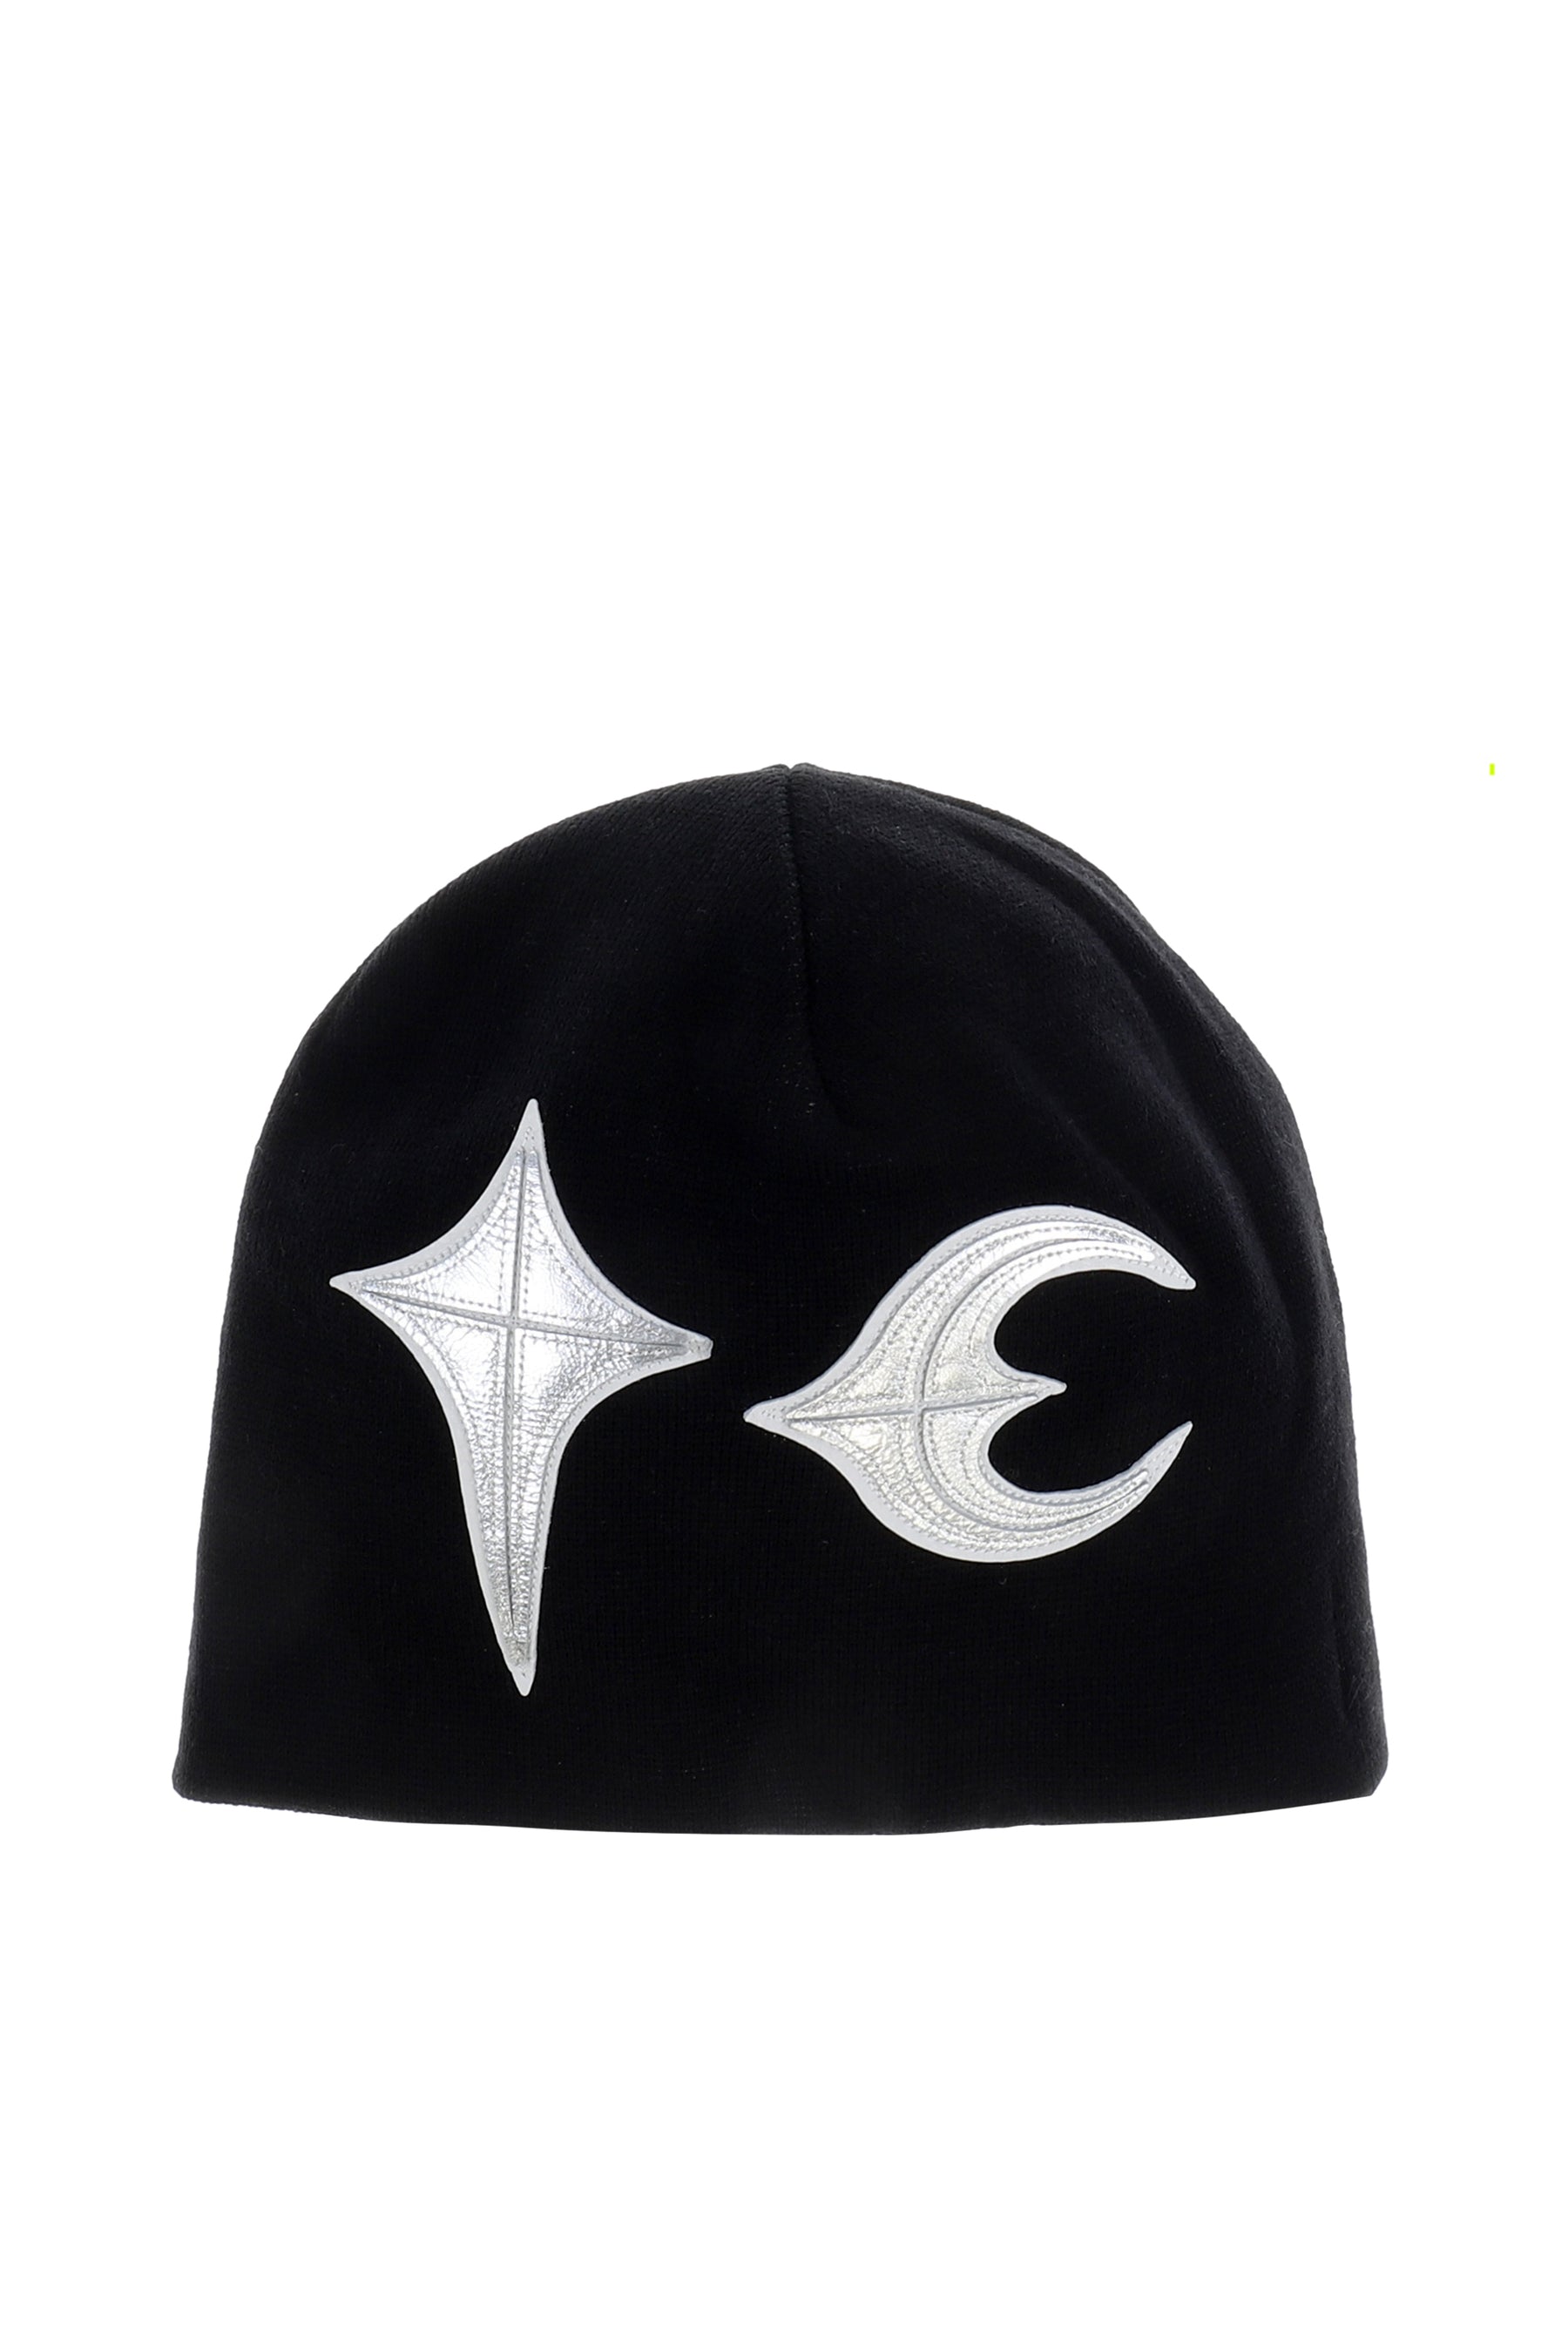 TC LEATHER PATCH BEANIE (EXCLUSIVE) / BLK